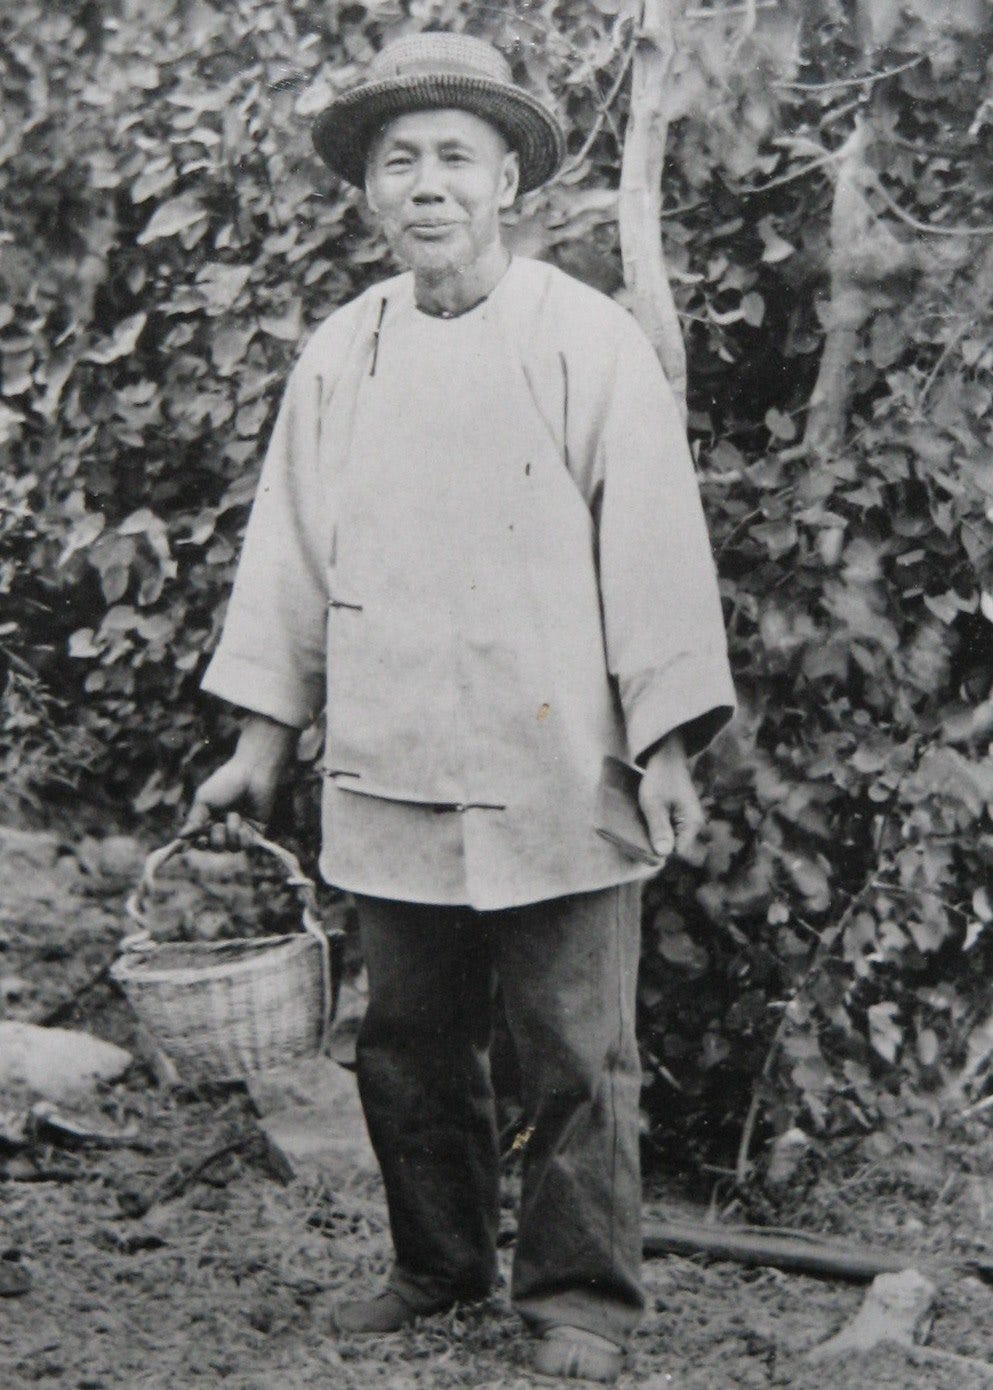 A black and white old photo with a middle-age looking Asian man standing in the field, holding a basket and smiling at camera.